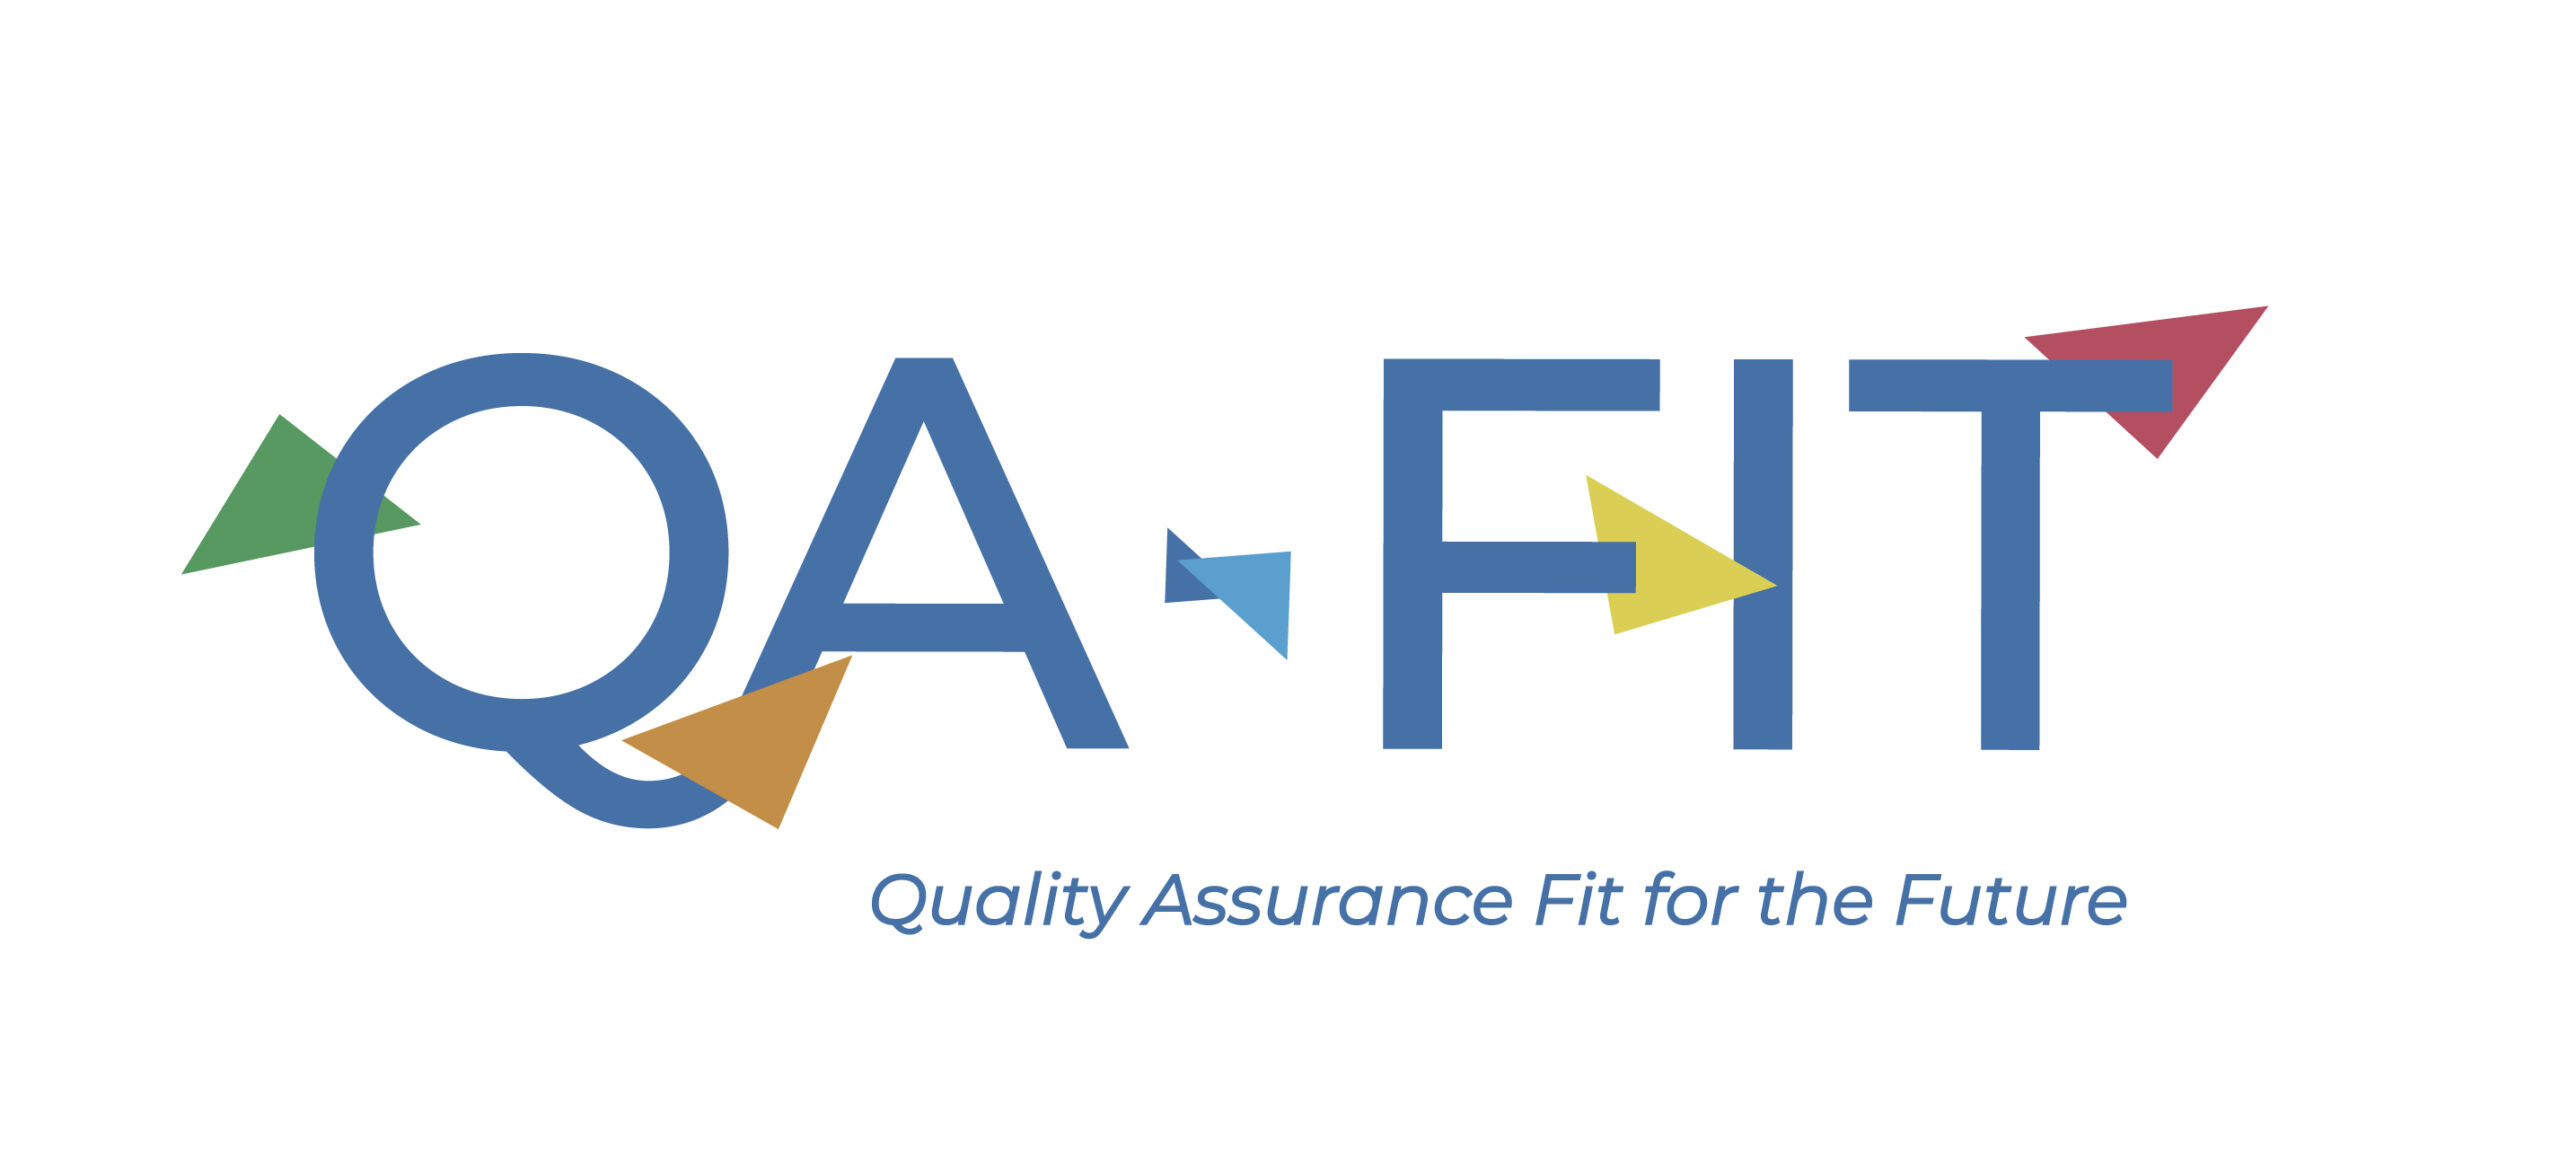 Quality Assurance Fit for the Future (QA-FIT) • ENQA